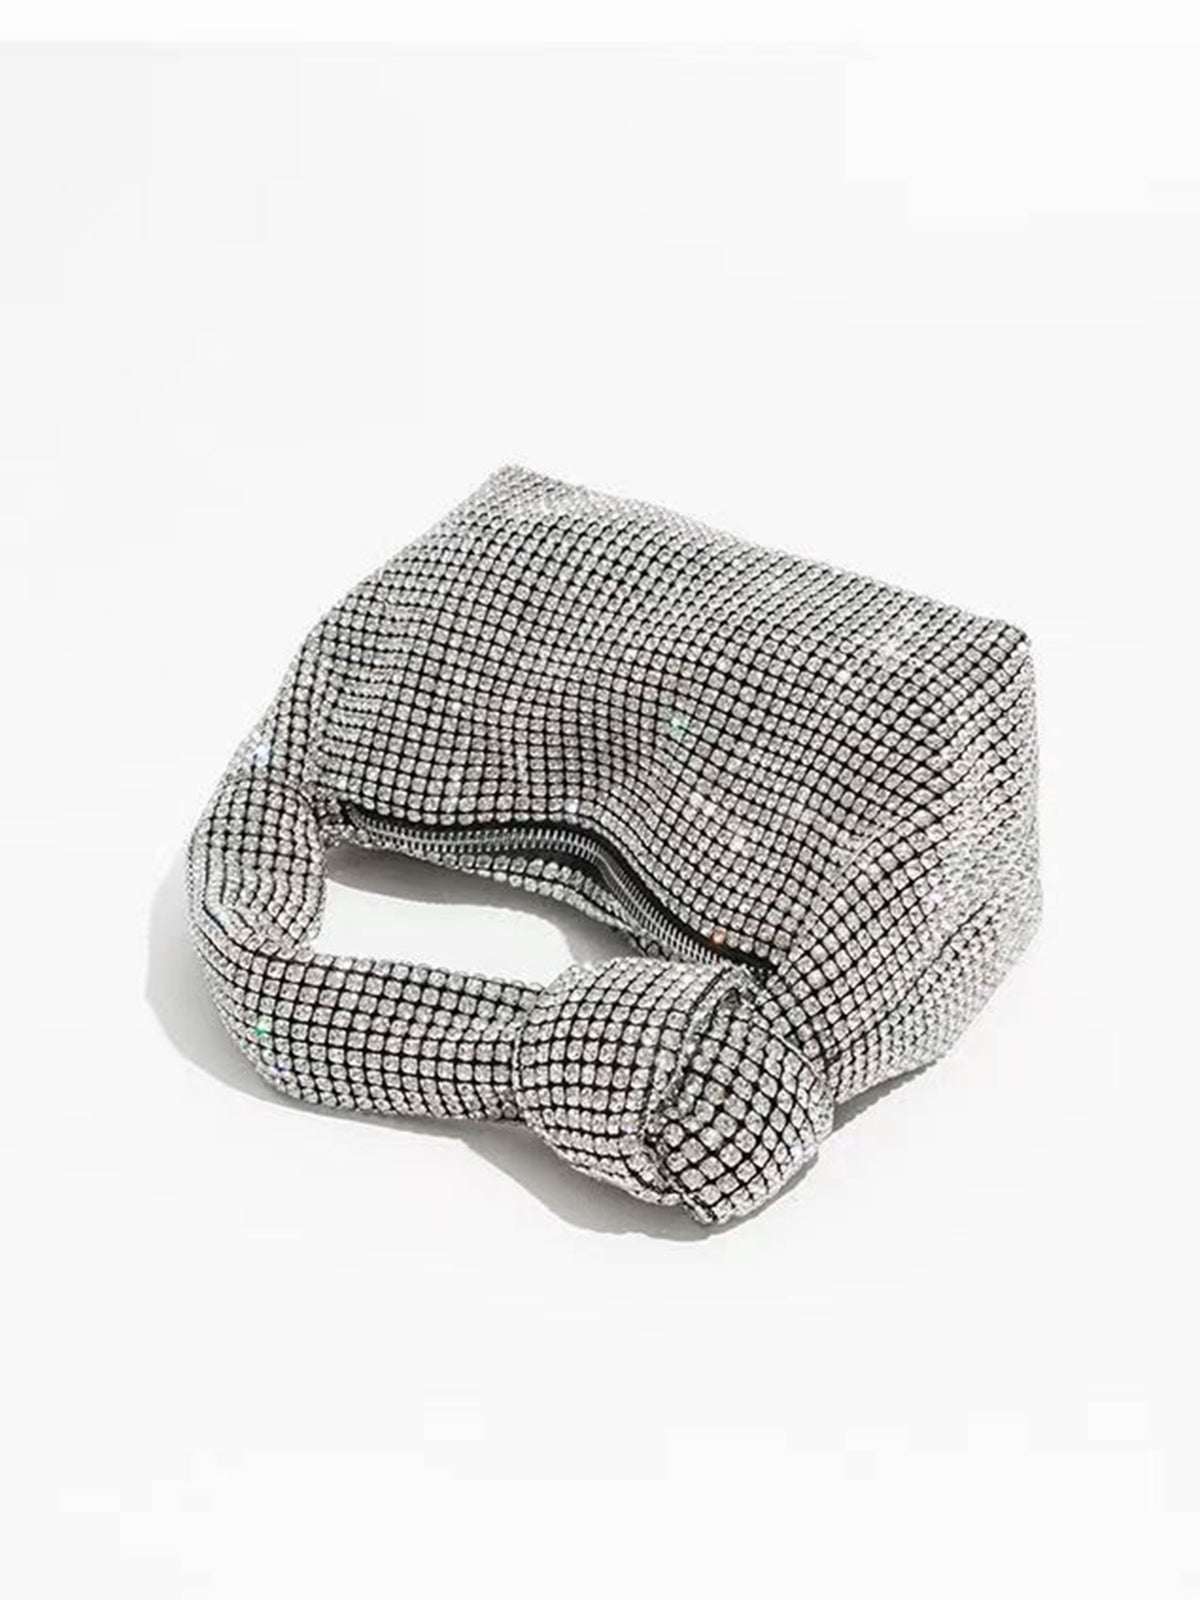 Diamante Knotted Bag